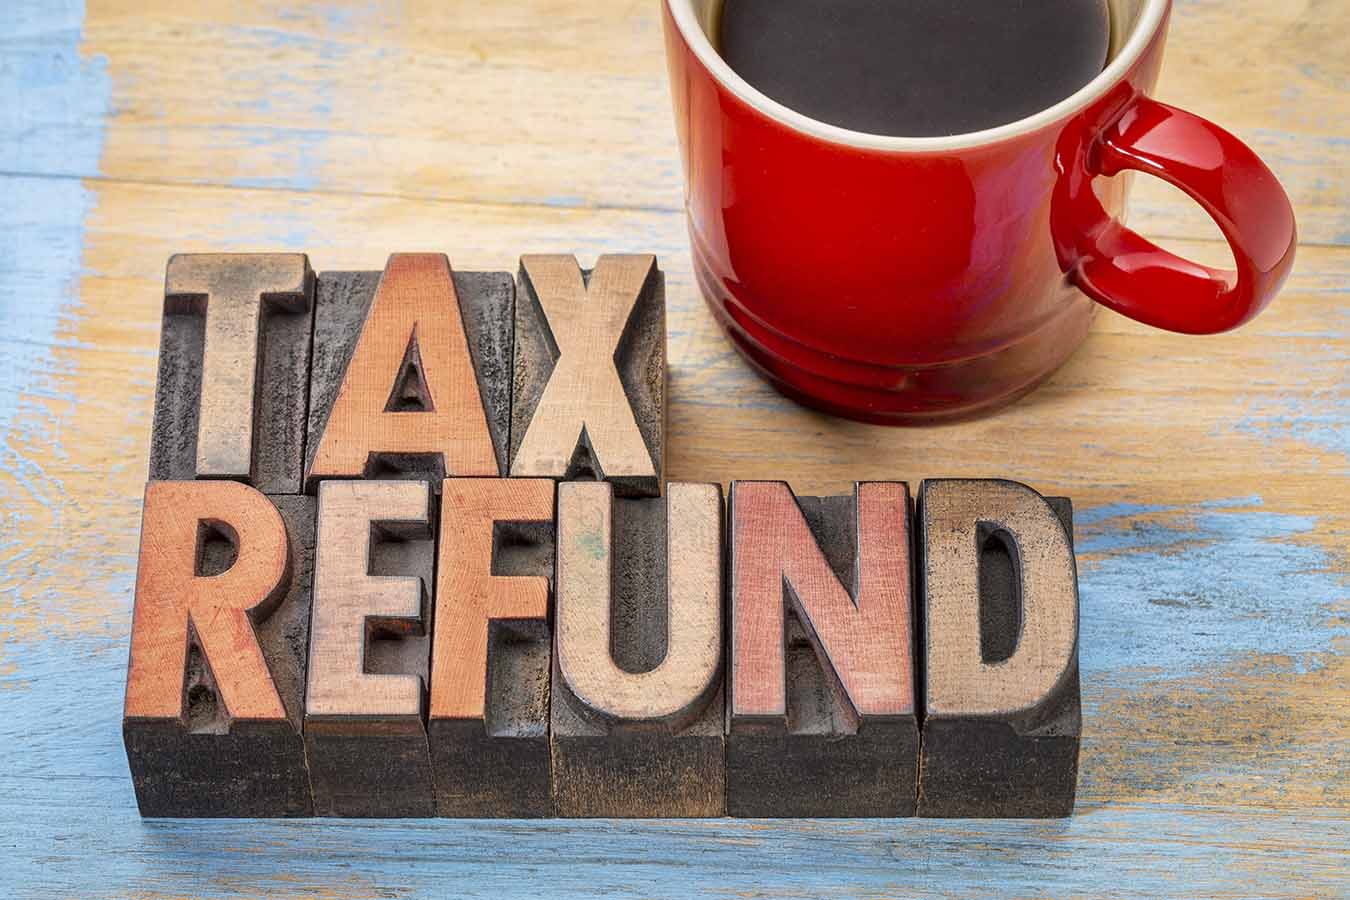 How To Get the Most Out of Your Tax Refund